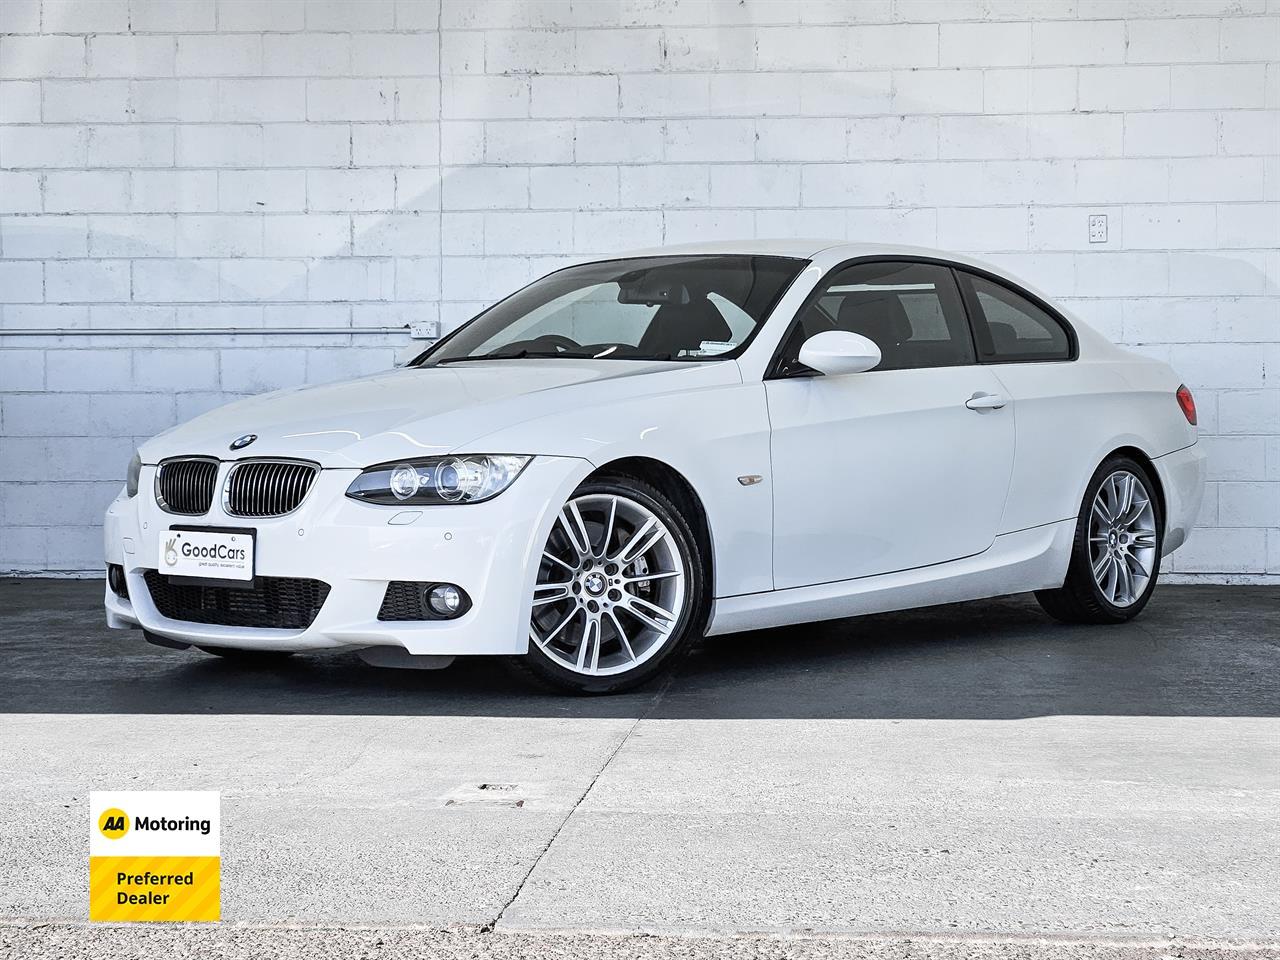 image-5, 2008 BMW 335i M Sport Coupe at Christchurch